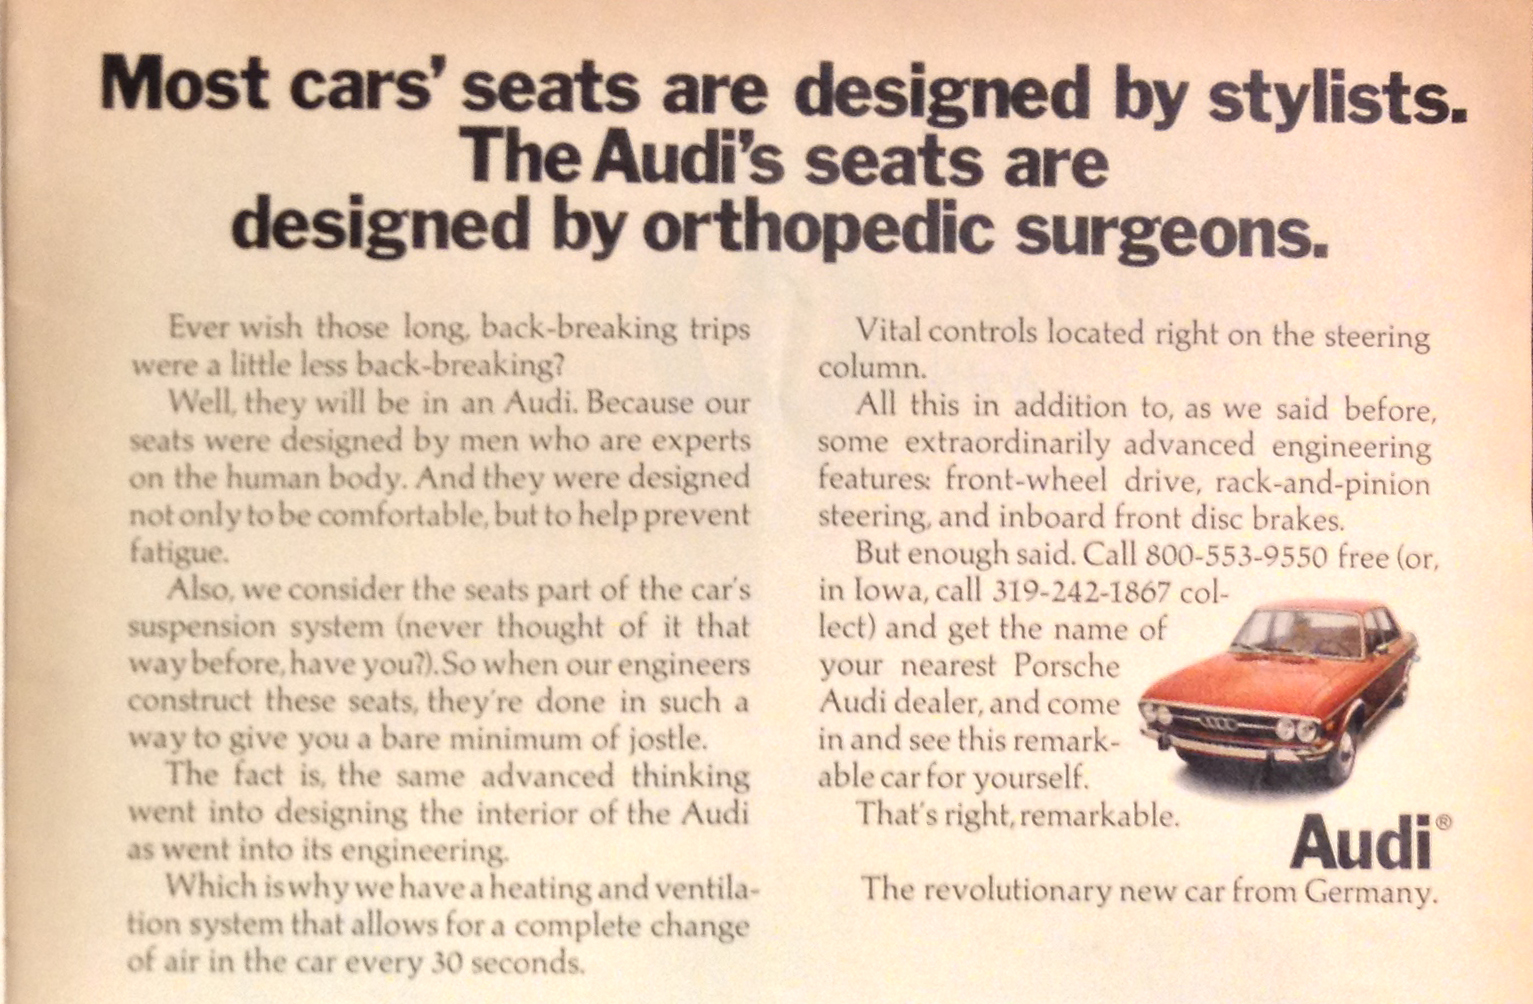 Audi Advertising - 29 May 1970 LIFE Magazine pages 16 and 17 - Audi's orthopedic seats - text